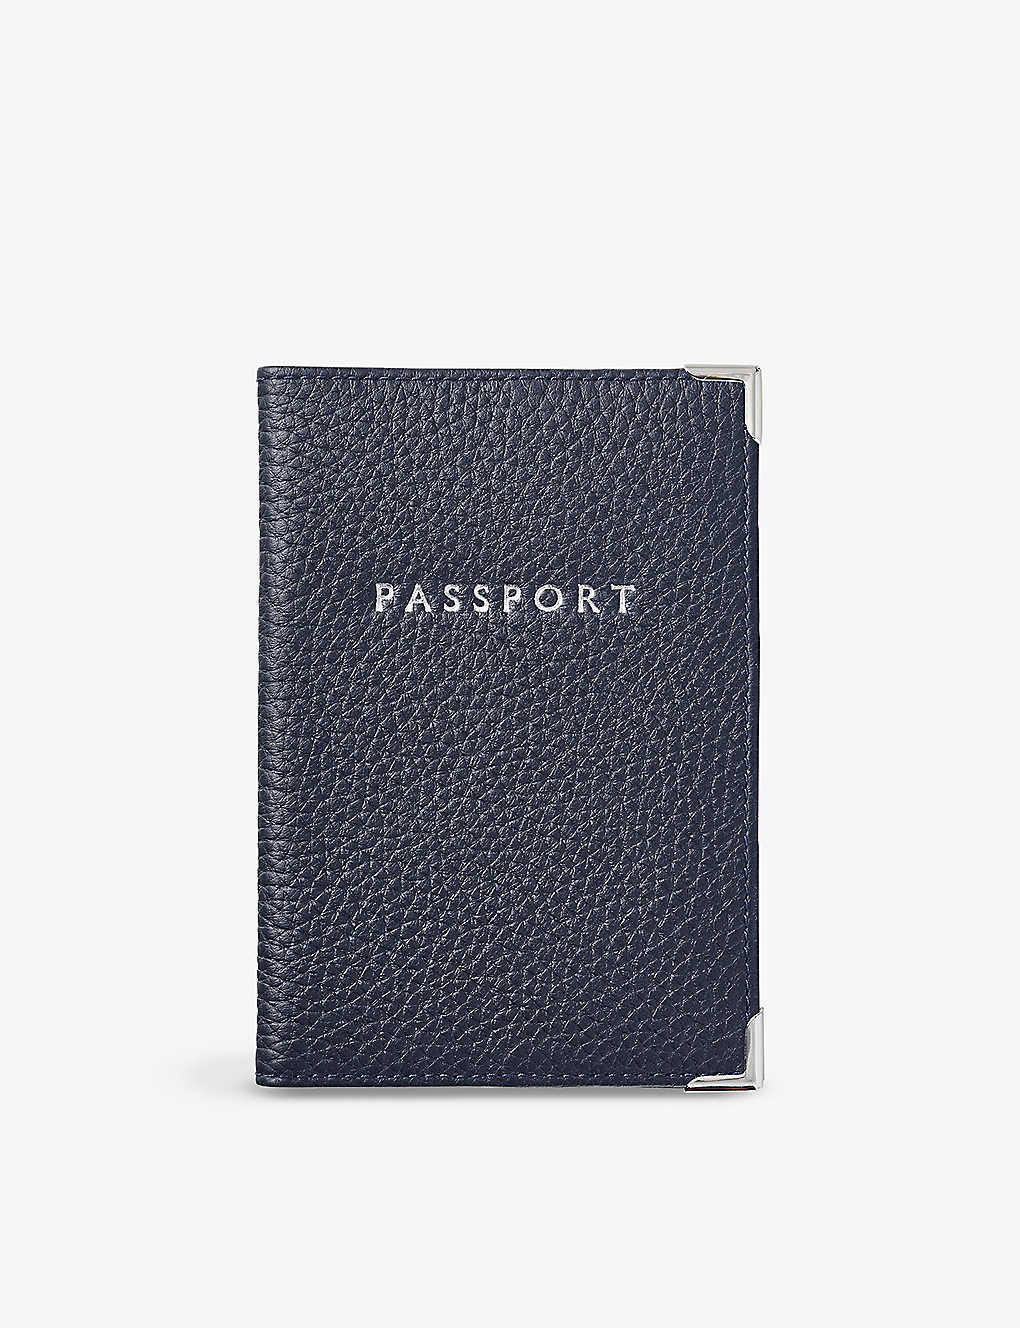 Aspinal Of London Navy Saffiano-leather Passport Cover